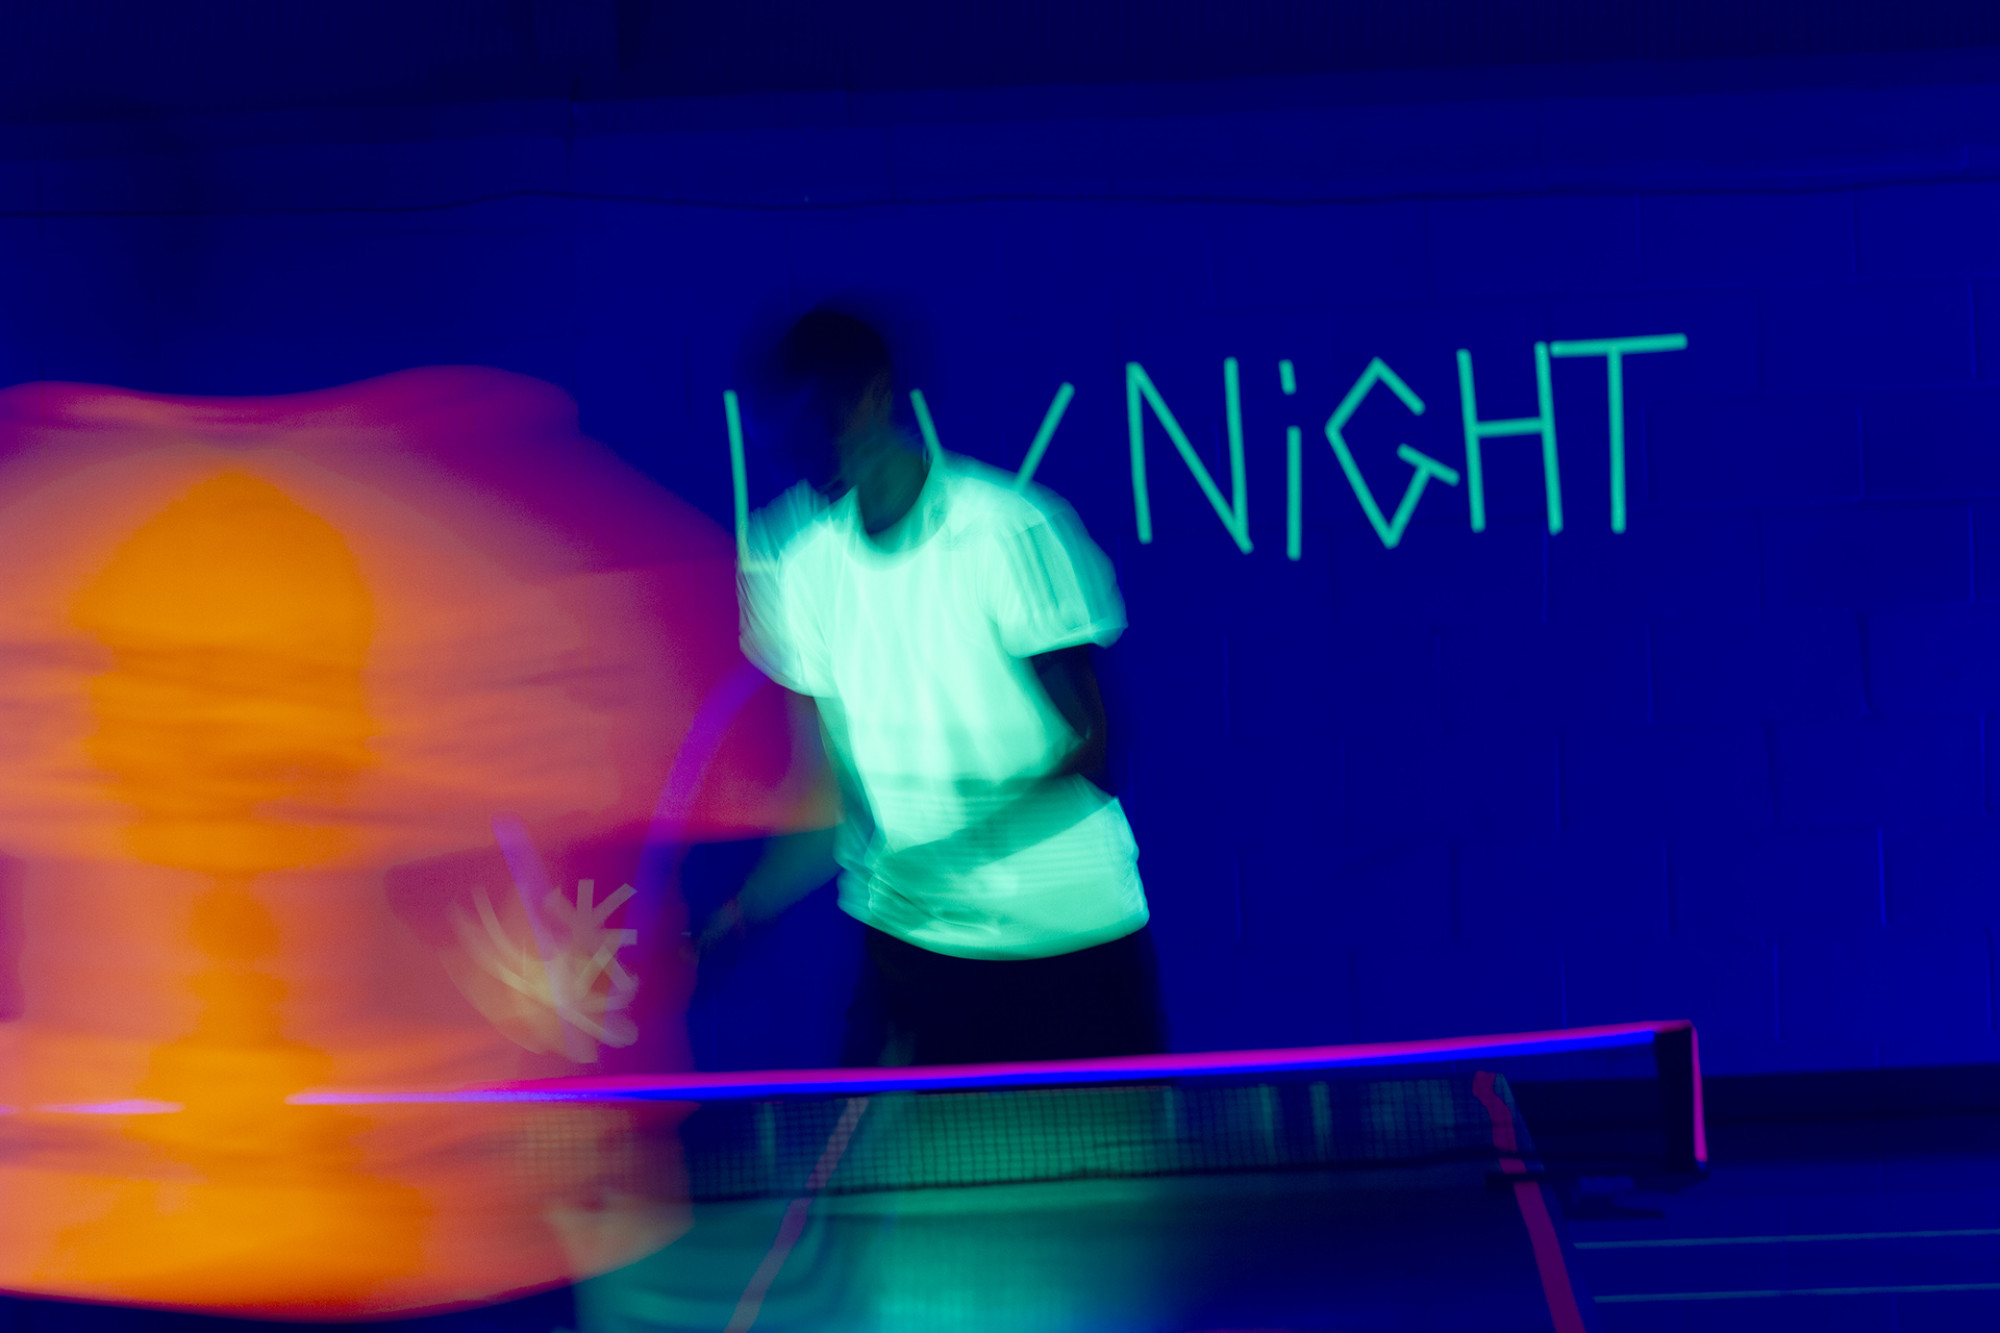 Blurry action photo of two people playing table tennis in the dark with UV lights